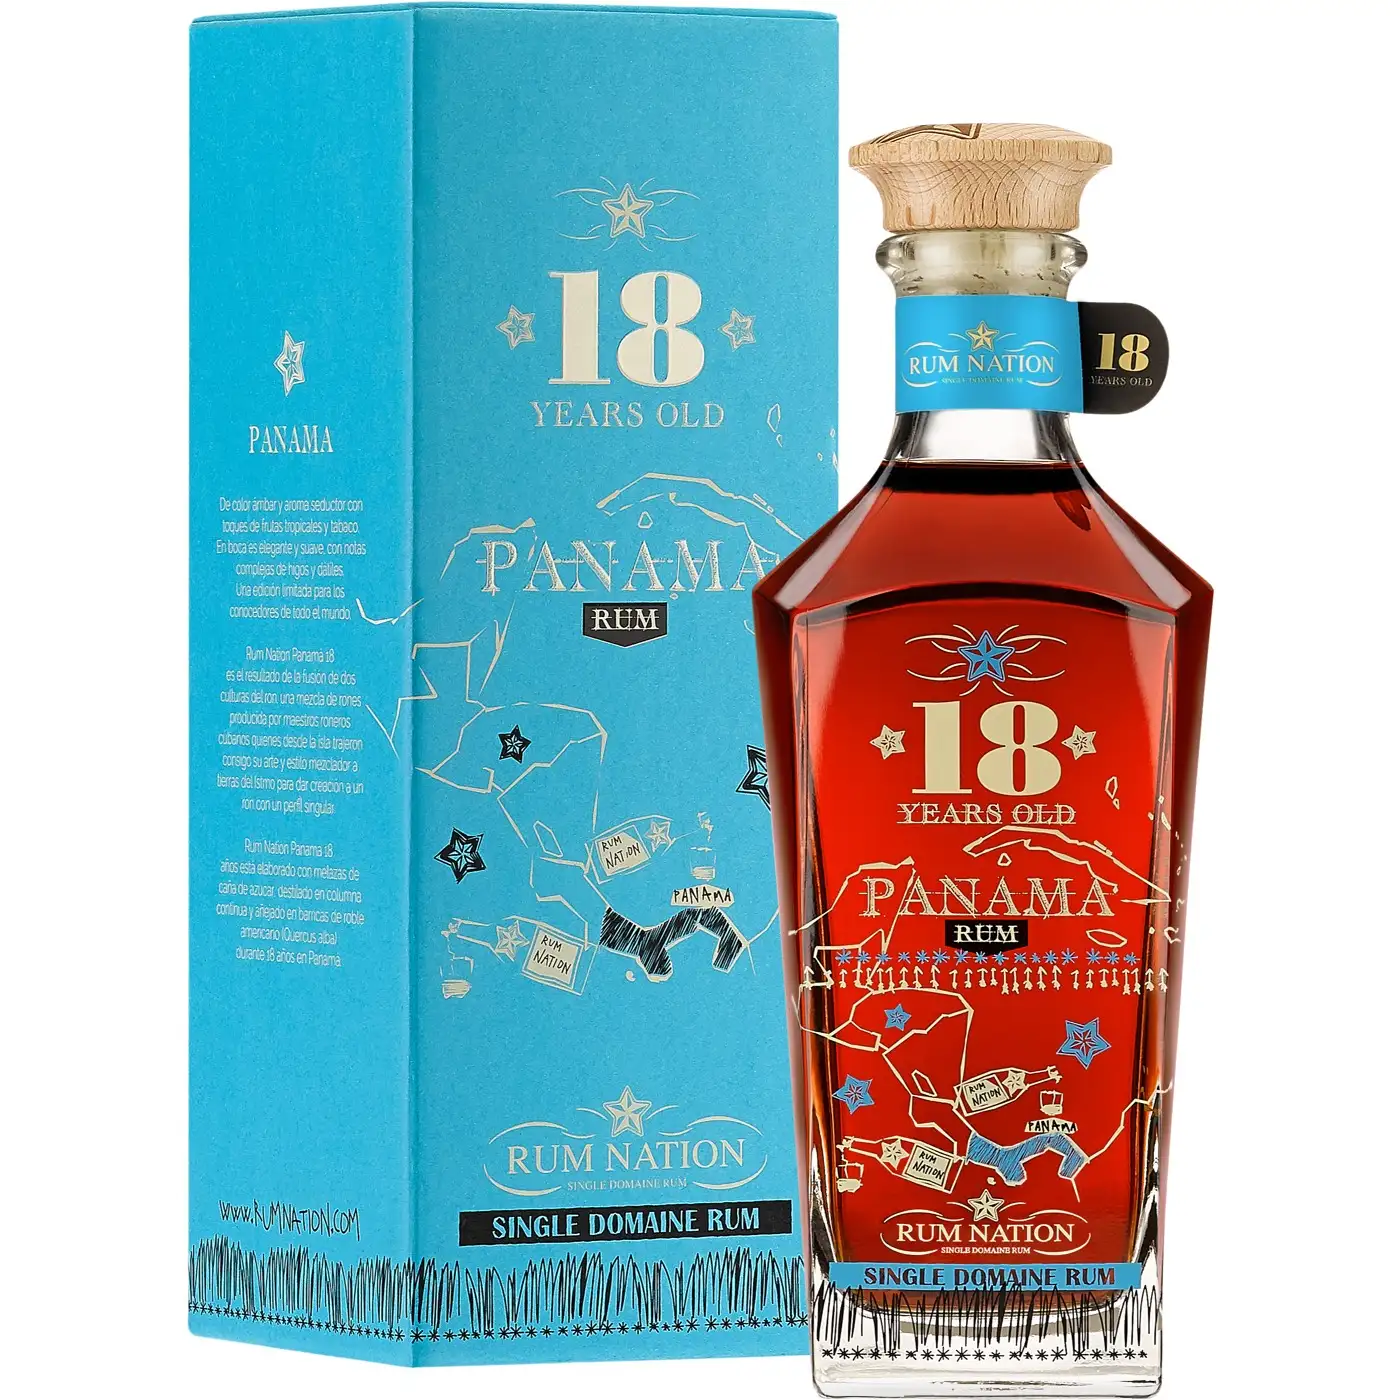 Image of the front of the bottle of the rum Panama Decanter 18 Years